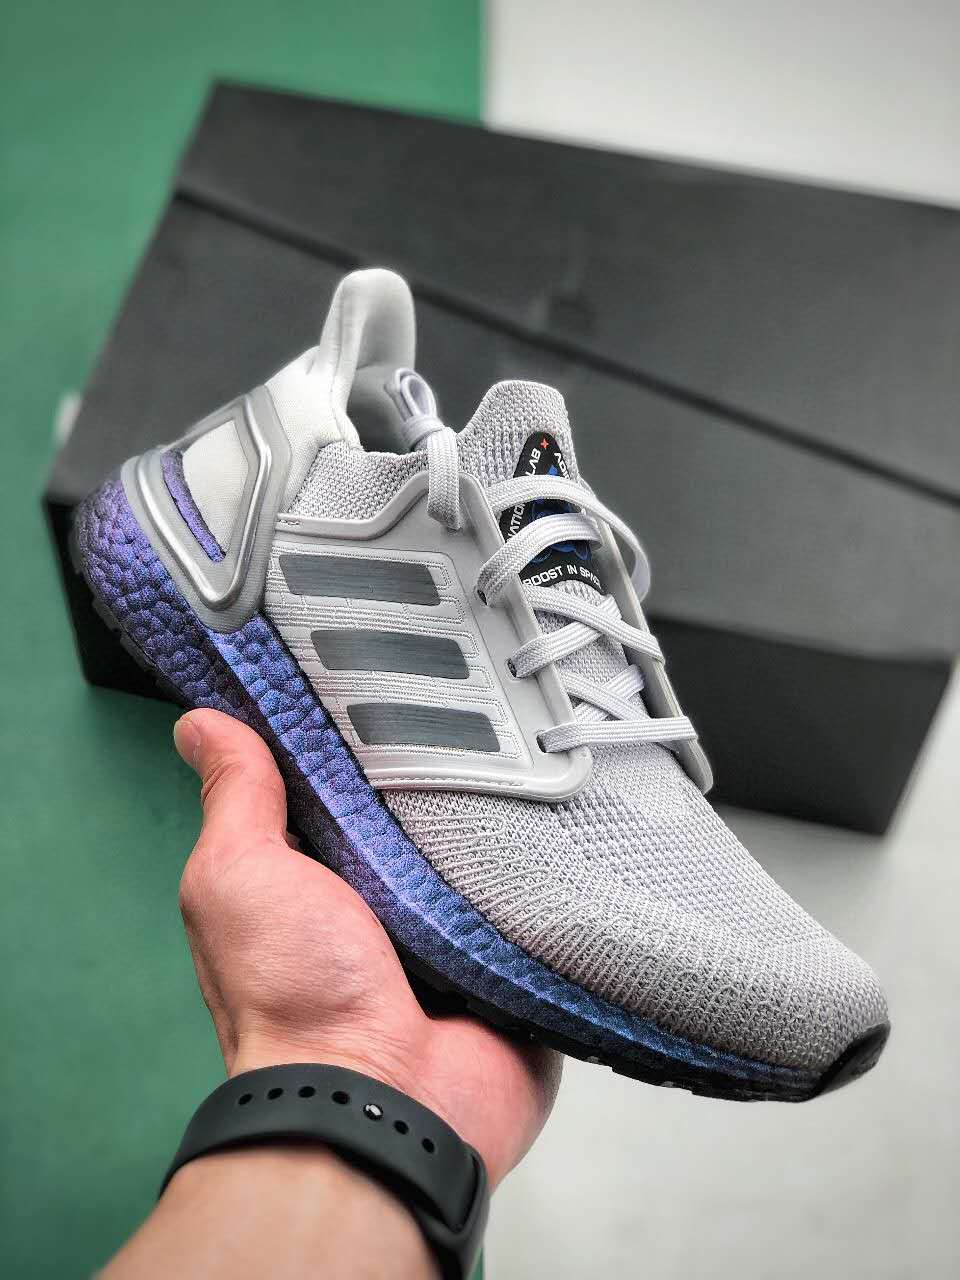 Adidas UltraBoost 2020 'ISS US National Lab - Blue Boost' EG0755 - Shop Now!